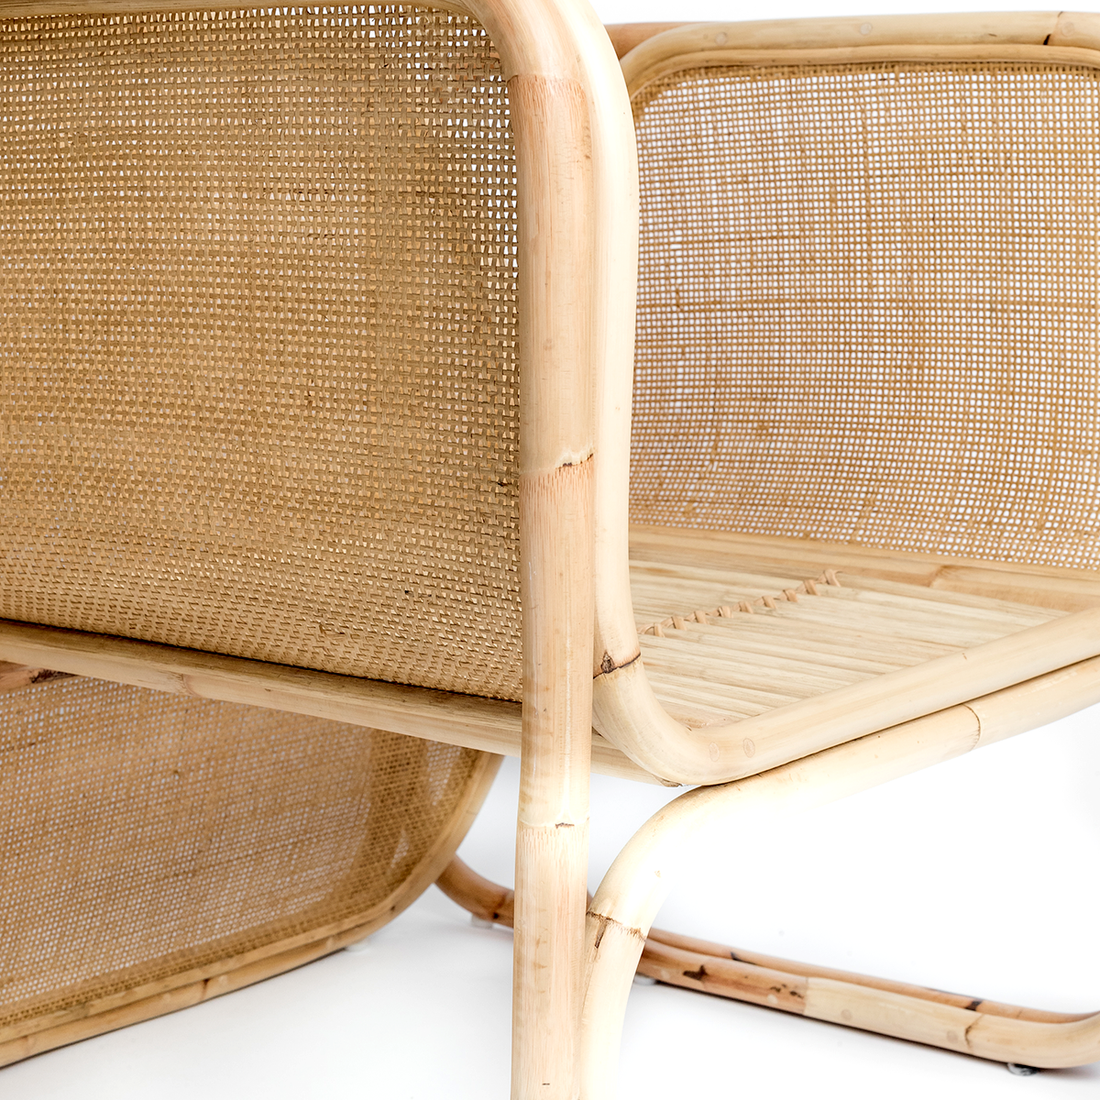 Sybella | Occasional Chair Rattan Natural